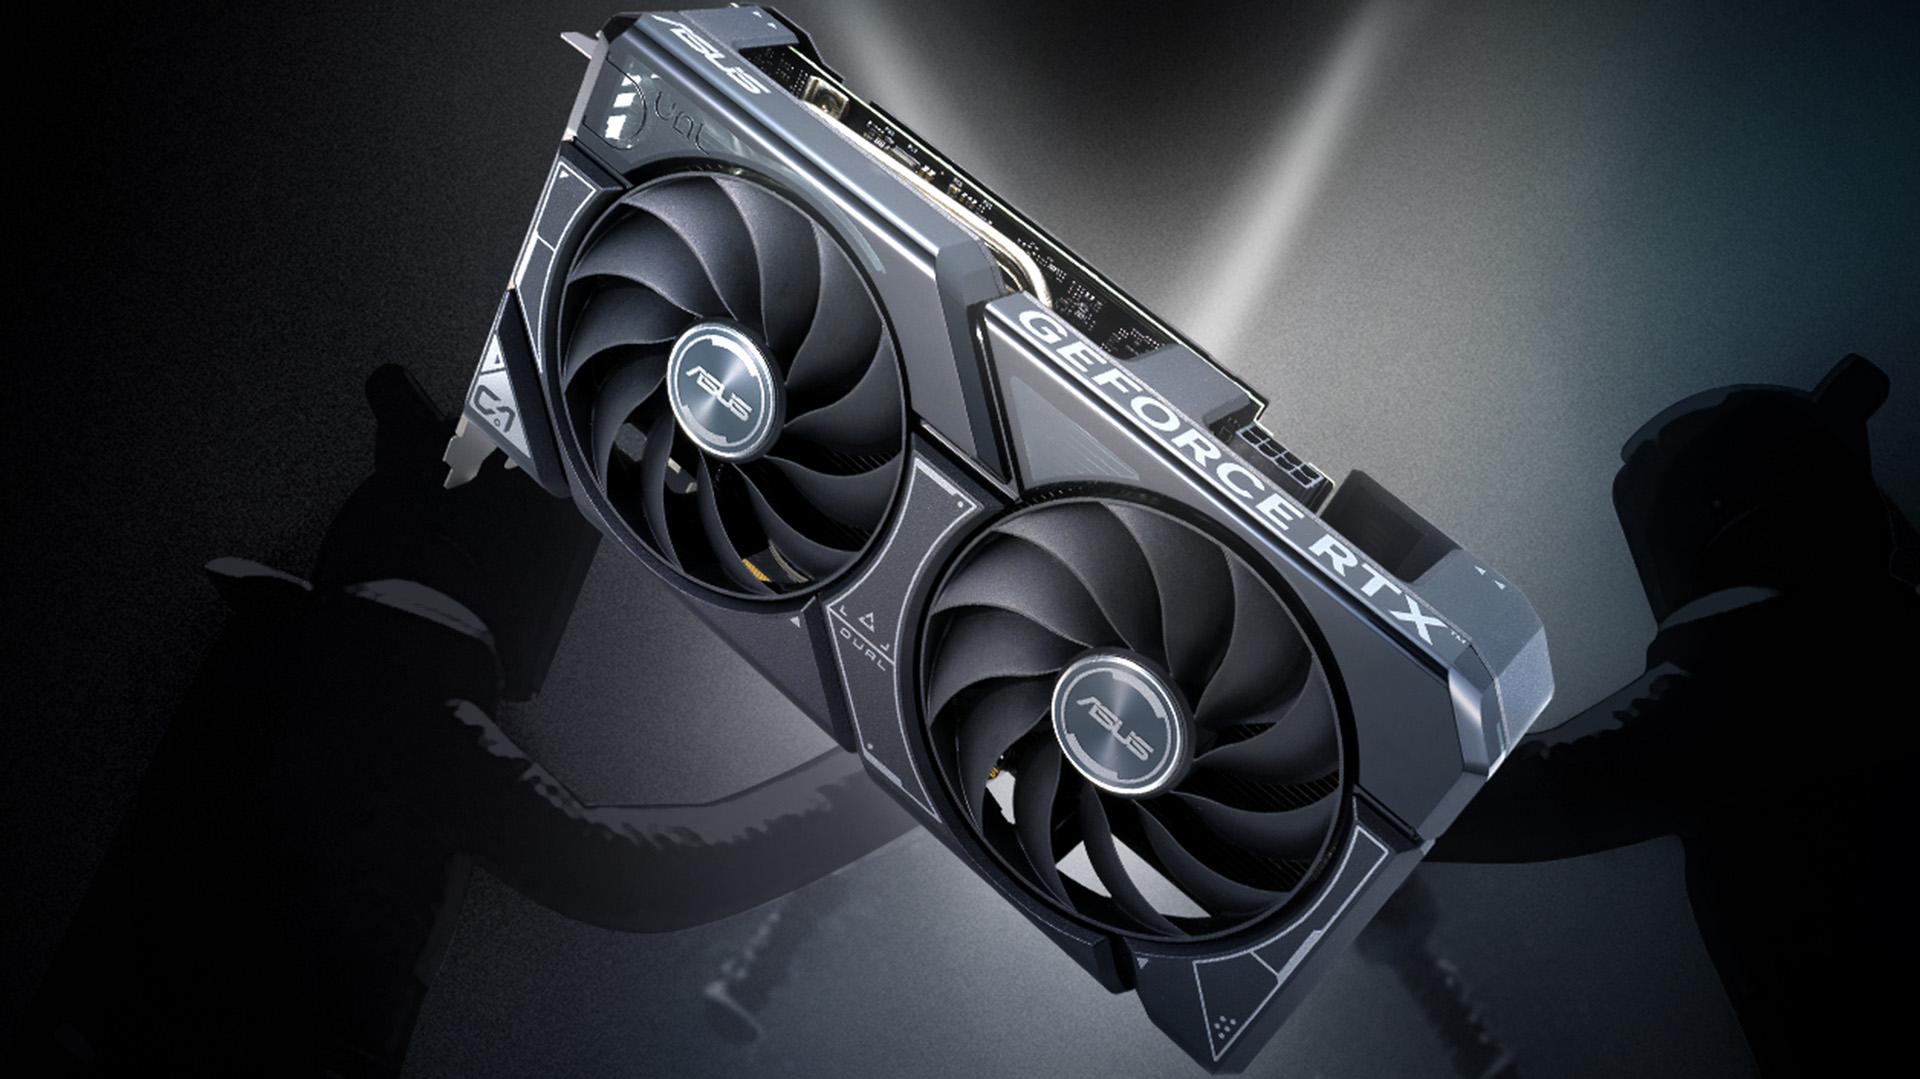 NVIDIA launches GeForce RTX 4060 Ti with 16GB without review coverage 